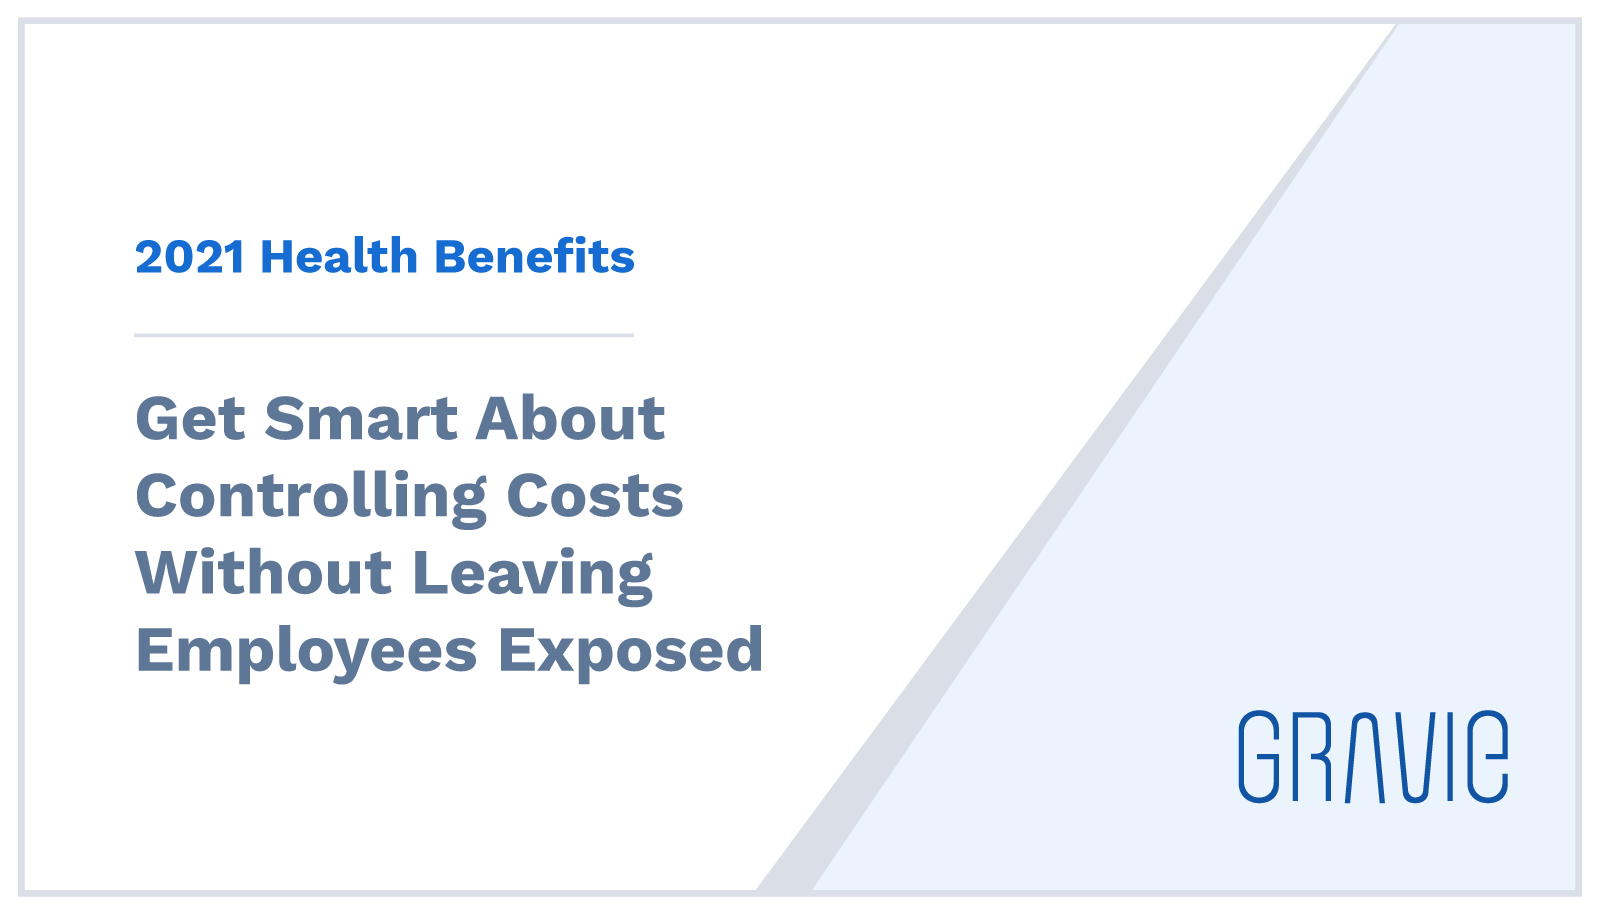 Get-smart-about-controlling-costs-without-leaving-employees-exposed